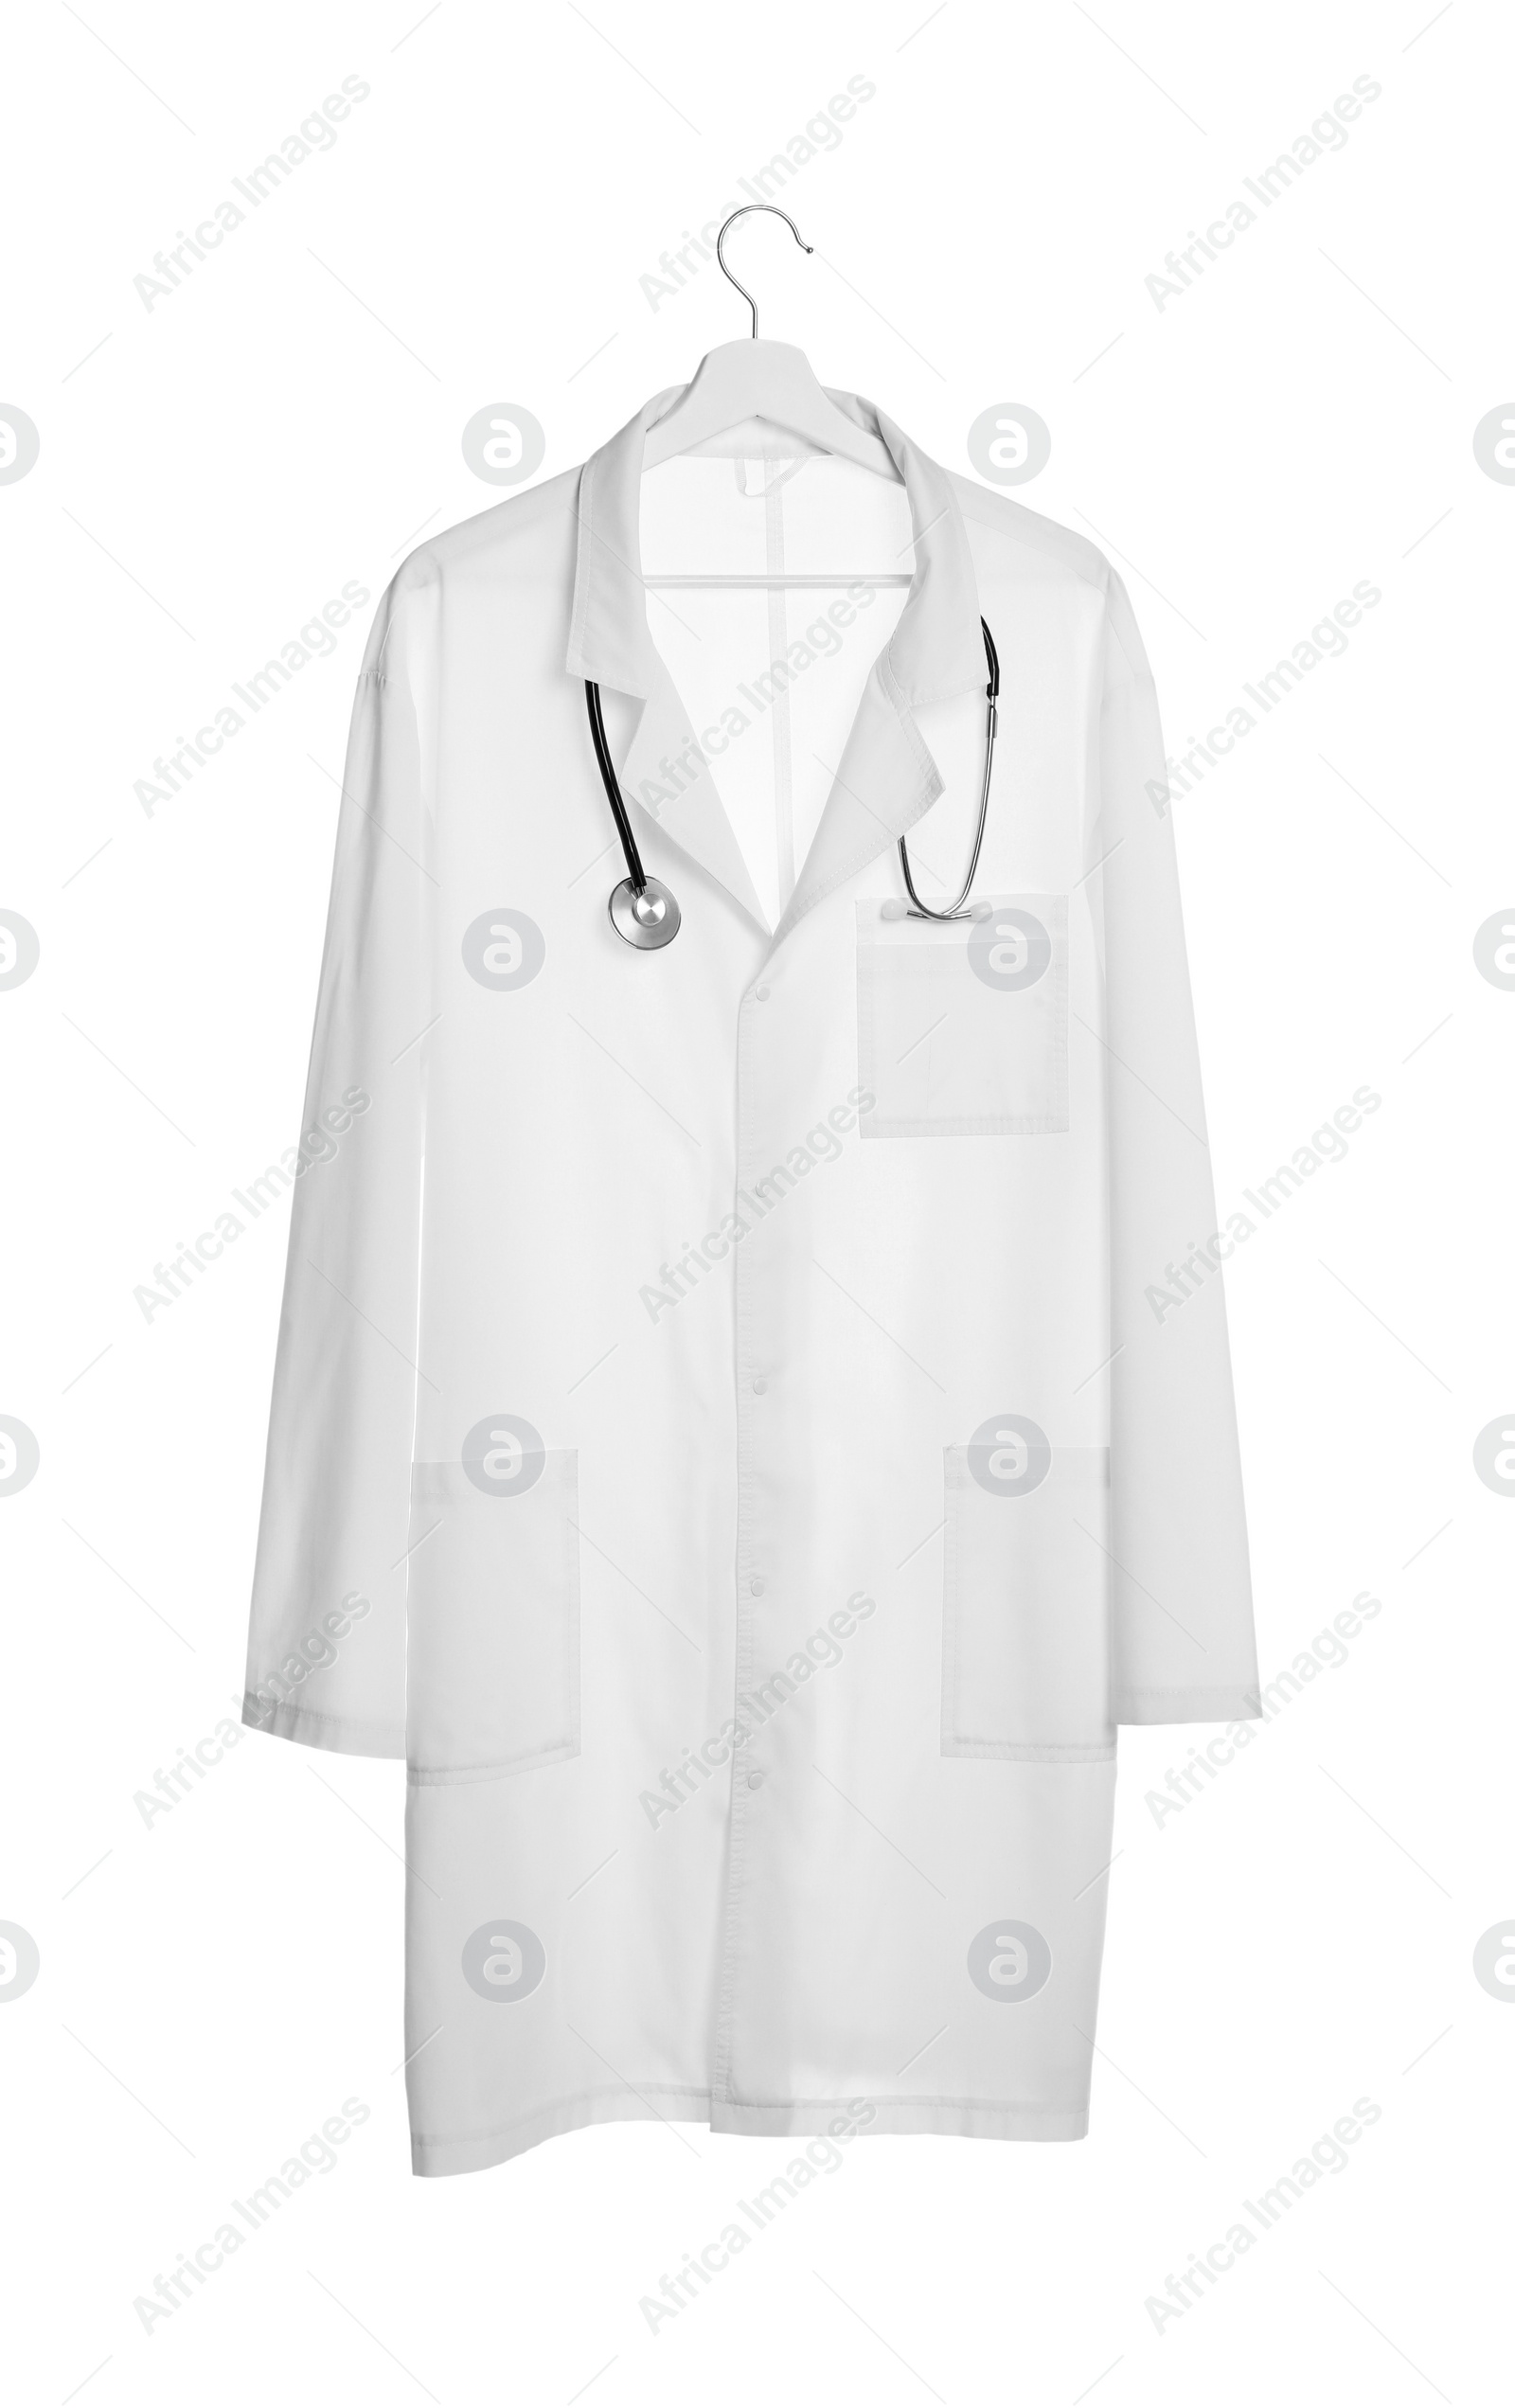 Photo of Doctor's gown and stethoscope isolated on white. Medical uniform